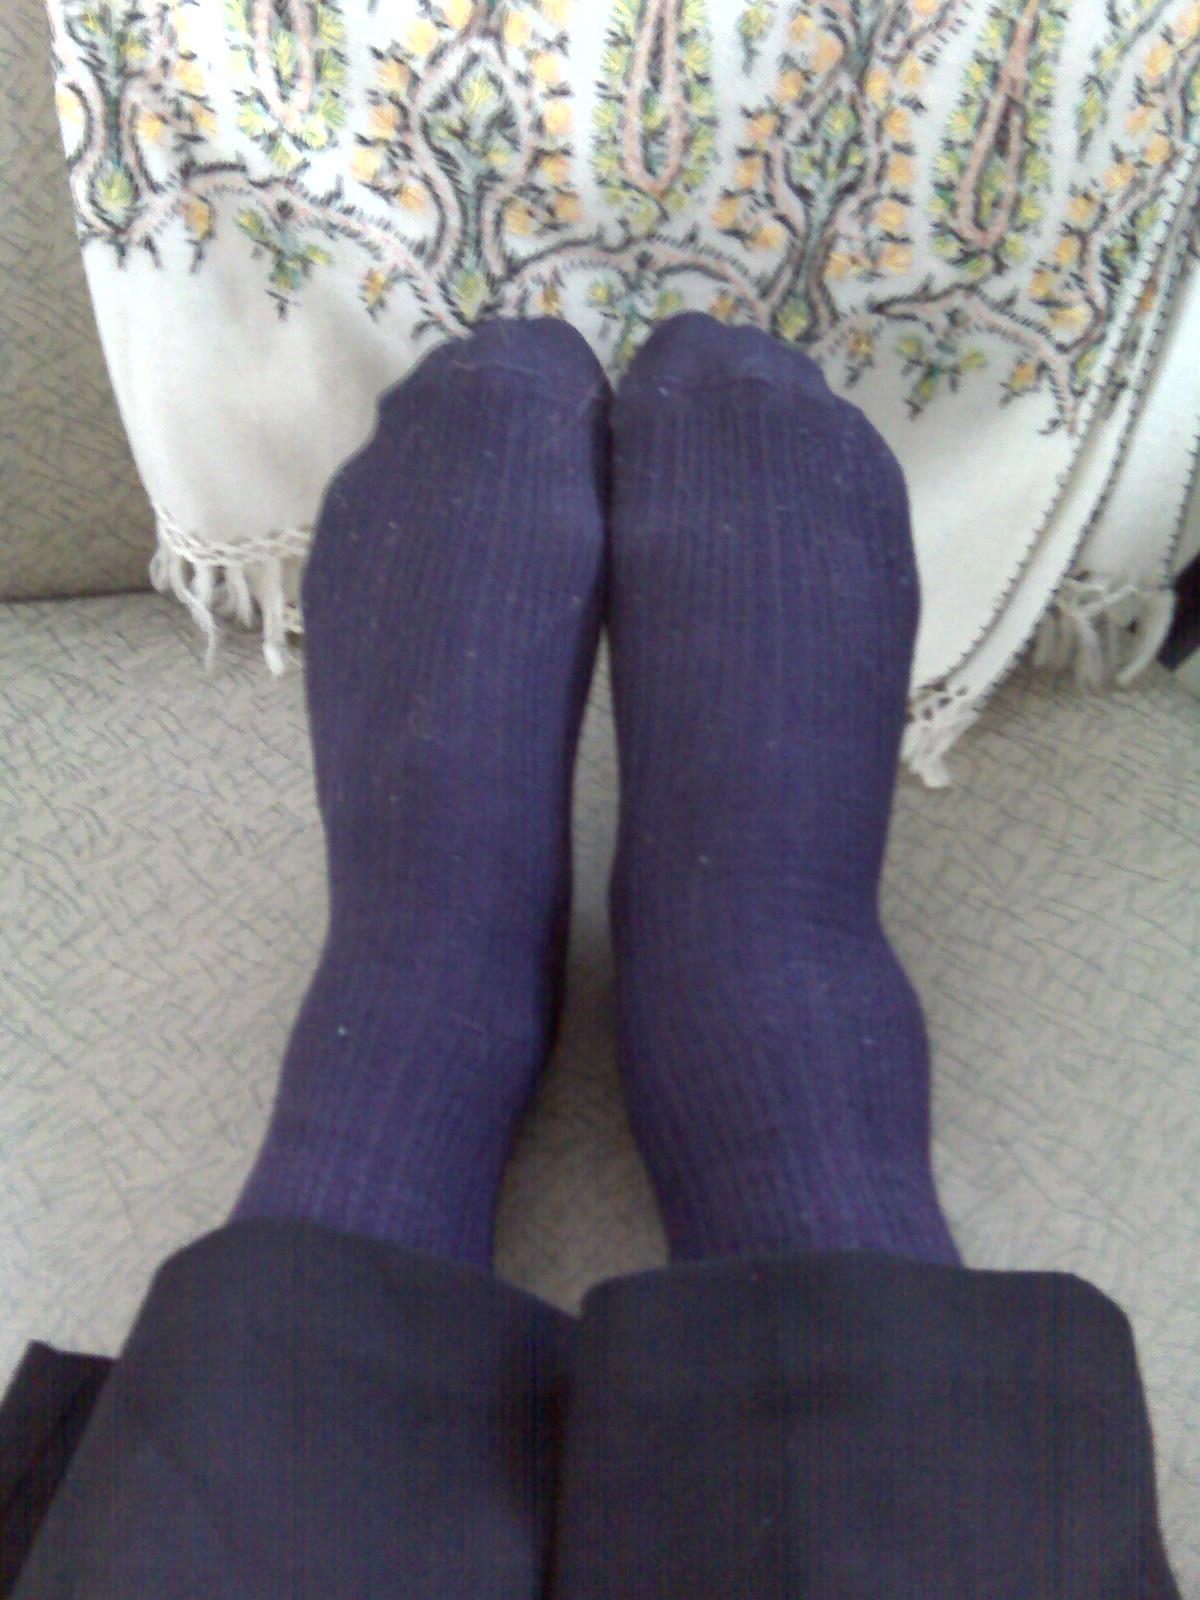 a person's feet in blue socks and stockings